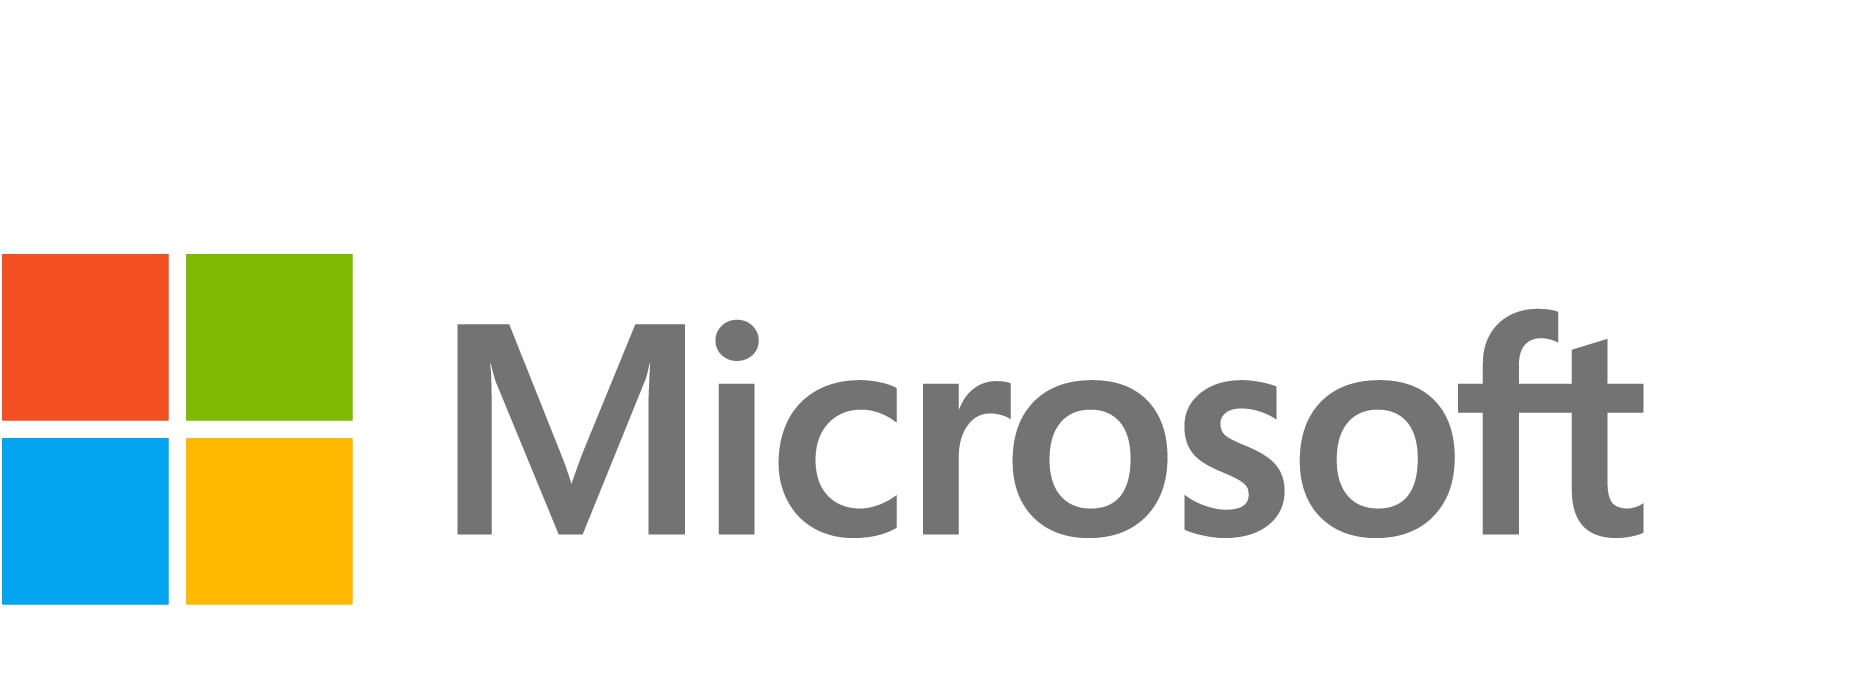 Microsoft 3 Year Extended Hardware Service Protection Plan Plus-Surface Laptop